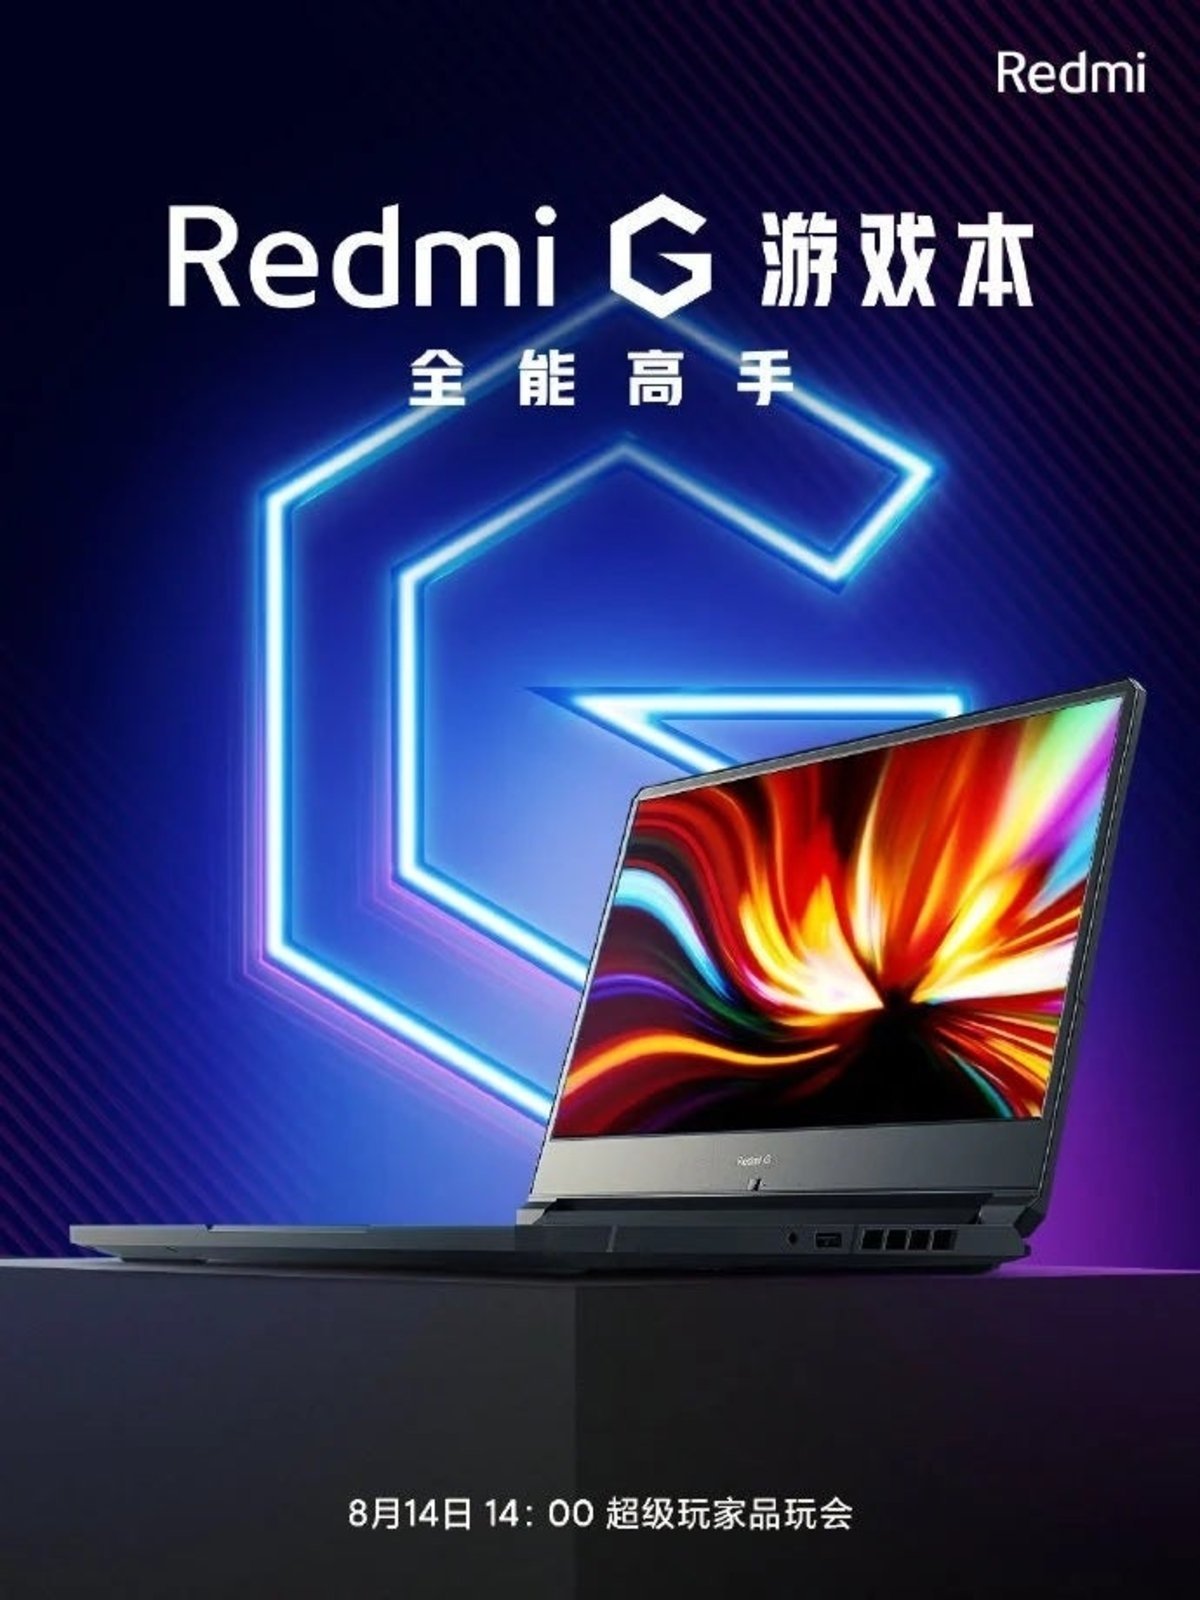 Redmi G Gaming Notebook, save the date